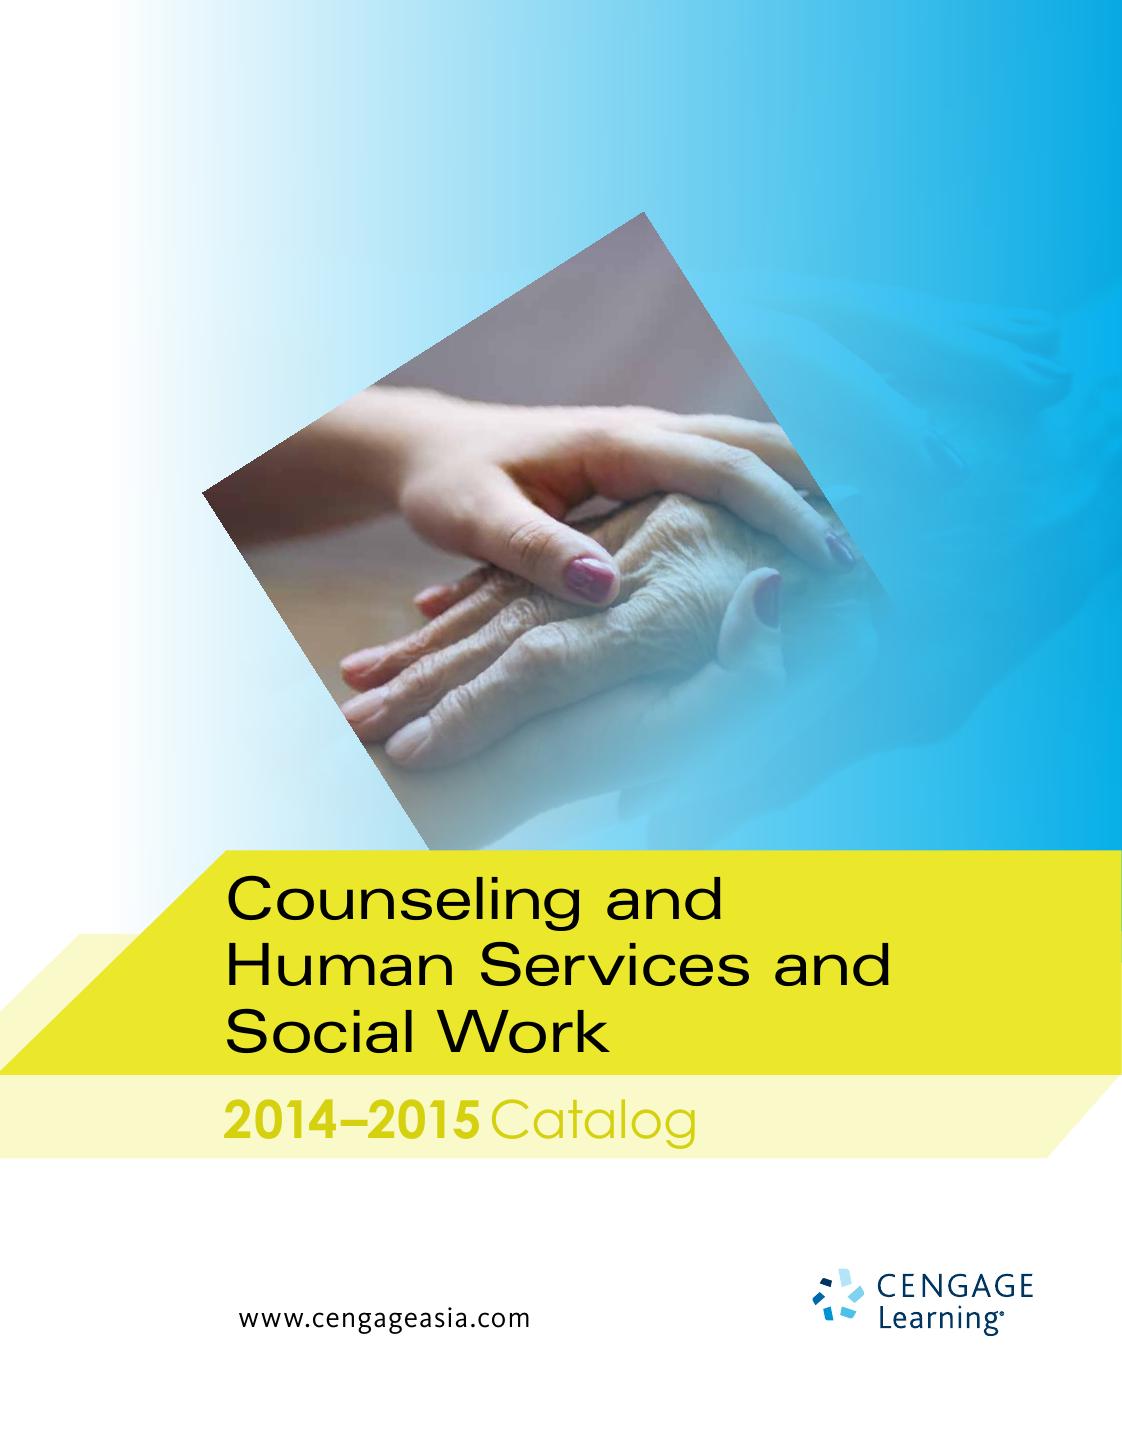 Acad Asia Counseling 2014-2015 Catalog 2013